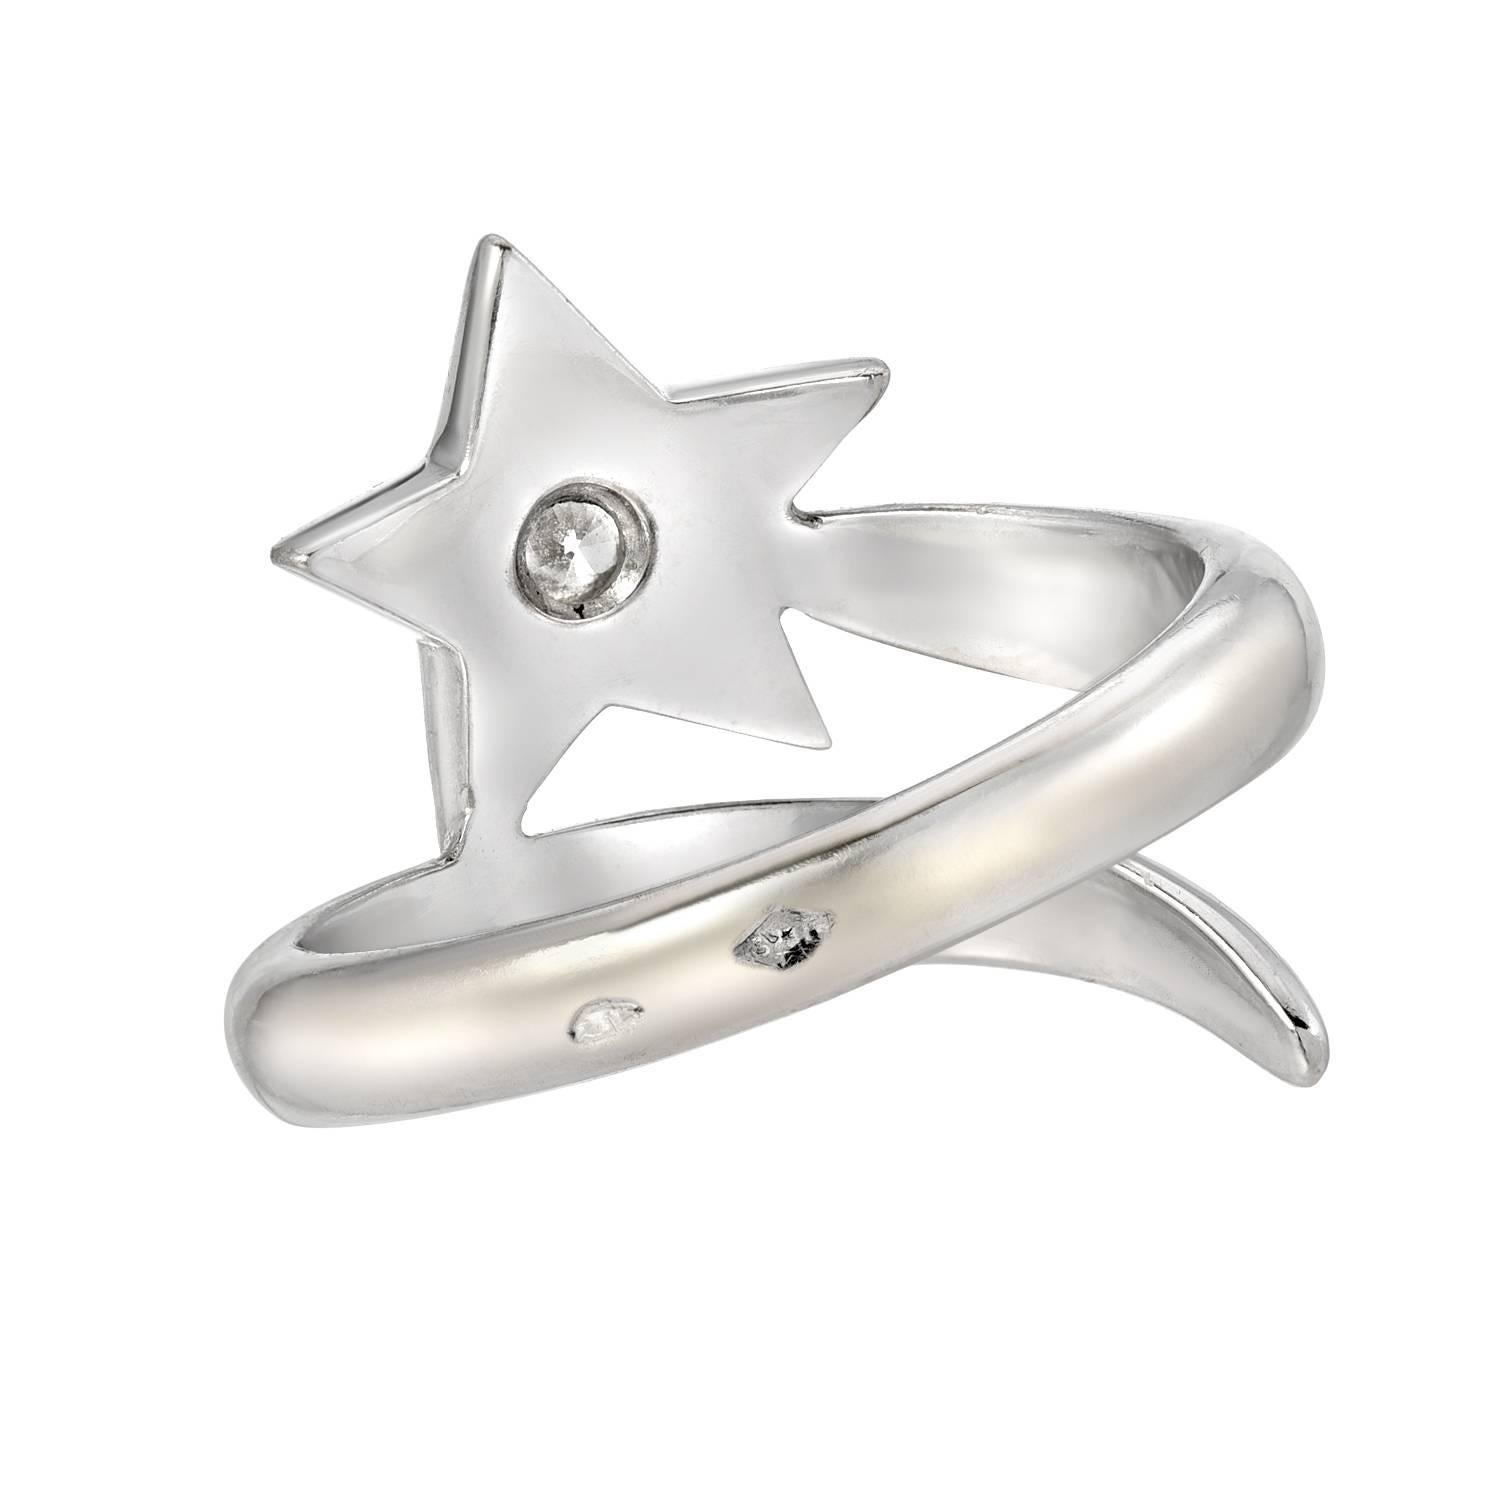 Designed as a shooting star, with a brilliant-cut diamond, mounted in 18k white gold
Weight of the diamond approximately 0.10 carats
Size 6.5

Super cute ring!!